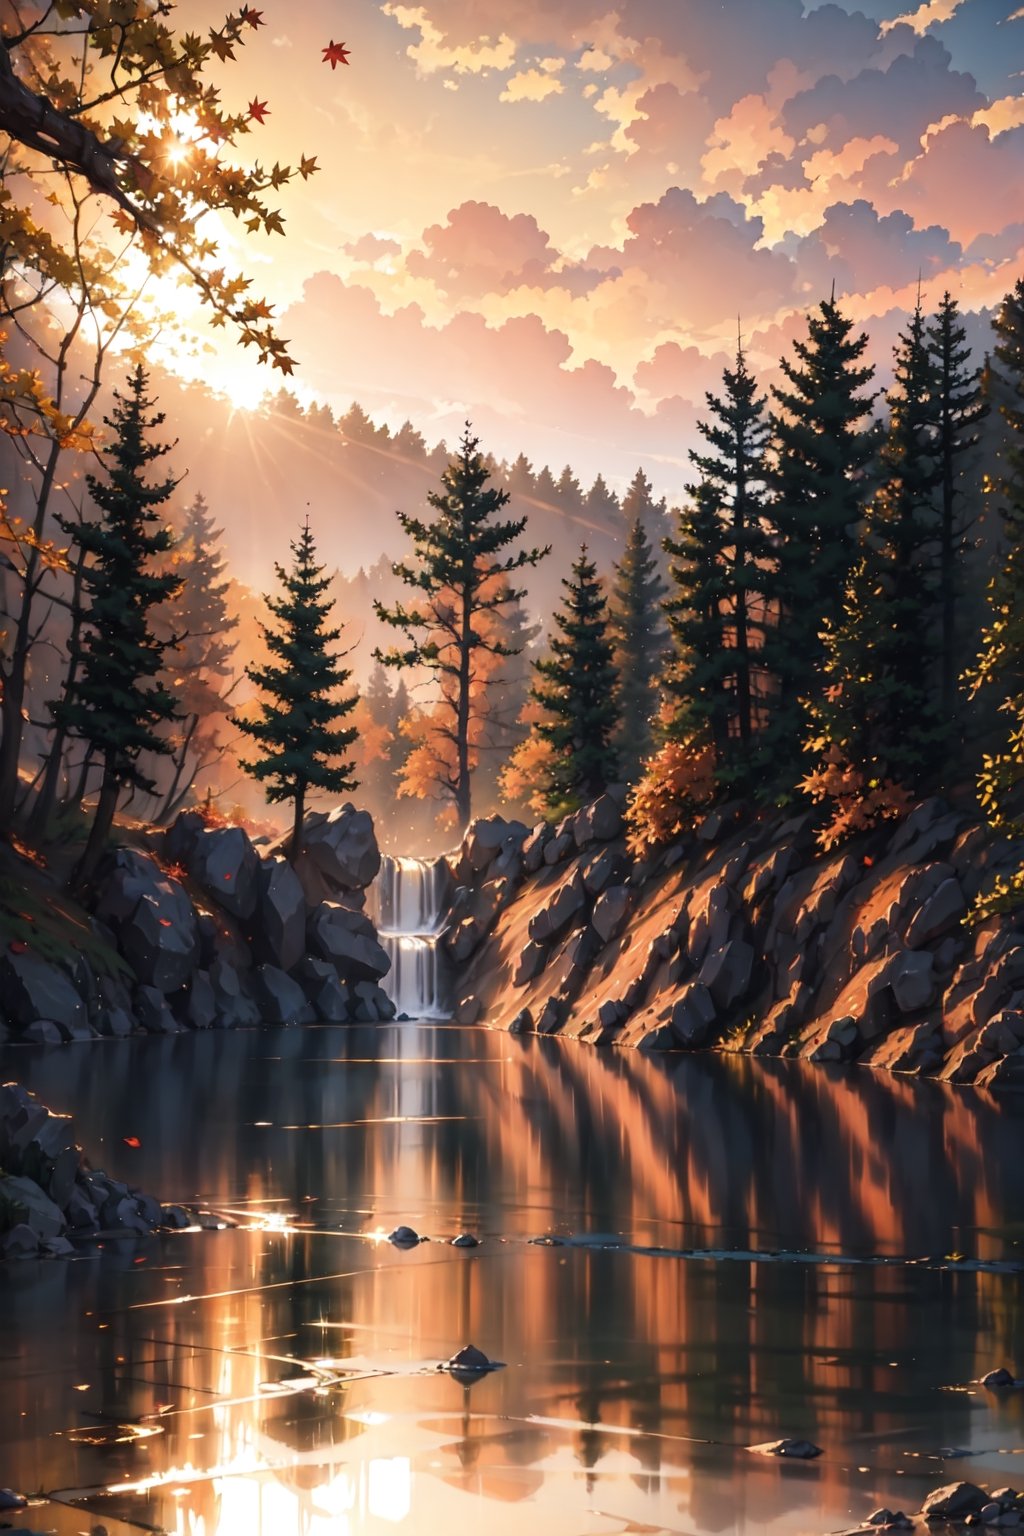 Landscape, sky, blurry, tree, autumn, water falls, river, stunning aesthetics, sunlight, majestic forest, beautiful and detailed image, reflection, sunset, 8k,detail,Detail,Detailed,Beautiful